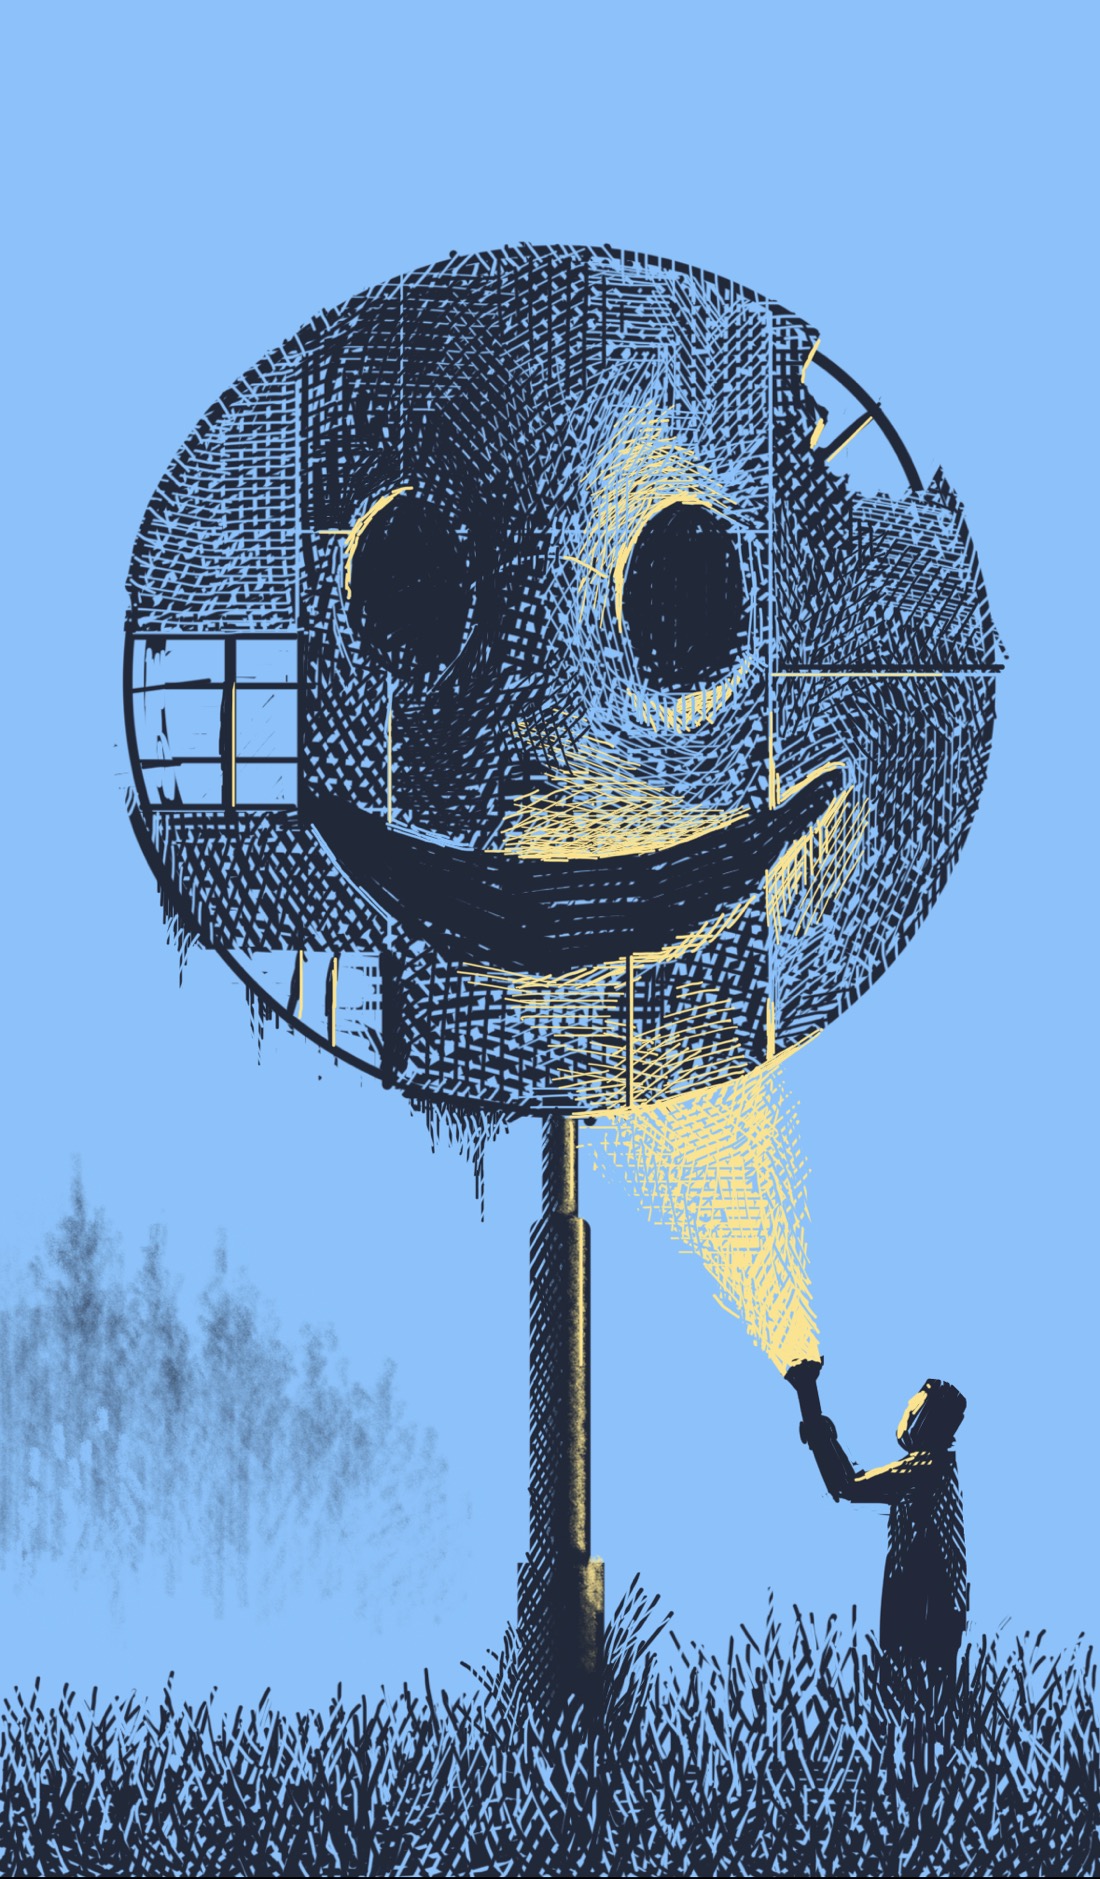 It is very late evening or very early morning. Standing in a grassy meadow is a giant round sign, maybe 10 feet in diameter: a smiley-face that appears to be constructed from metal and plastic, like a sign for a gas station or roadside attraction. The sign is falling apart: panels are missing or broken, revealing the metal framework underneath, and plants dangle from the frame. In the background is the suggestion of a foggy tree line. Standing to the right of the sign is a person, shining a flashlight up at it. The darkness and the beam from the flashlight throw the seams and contours of the sign into sharp relief, making the smile empty and menacing. As Lon Chaney once said, "There's nothing funny about a clown in the moonlight."